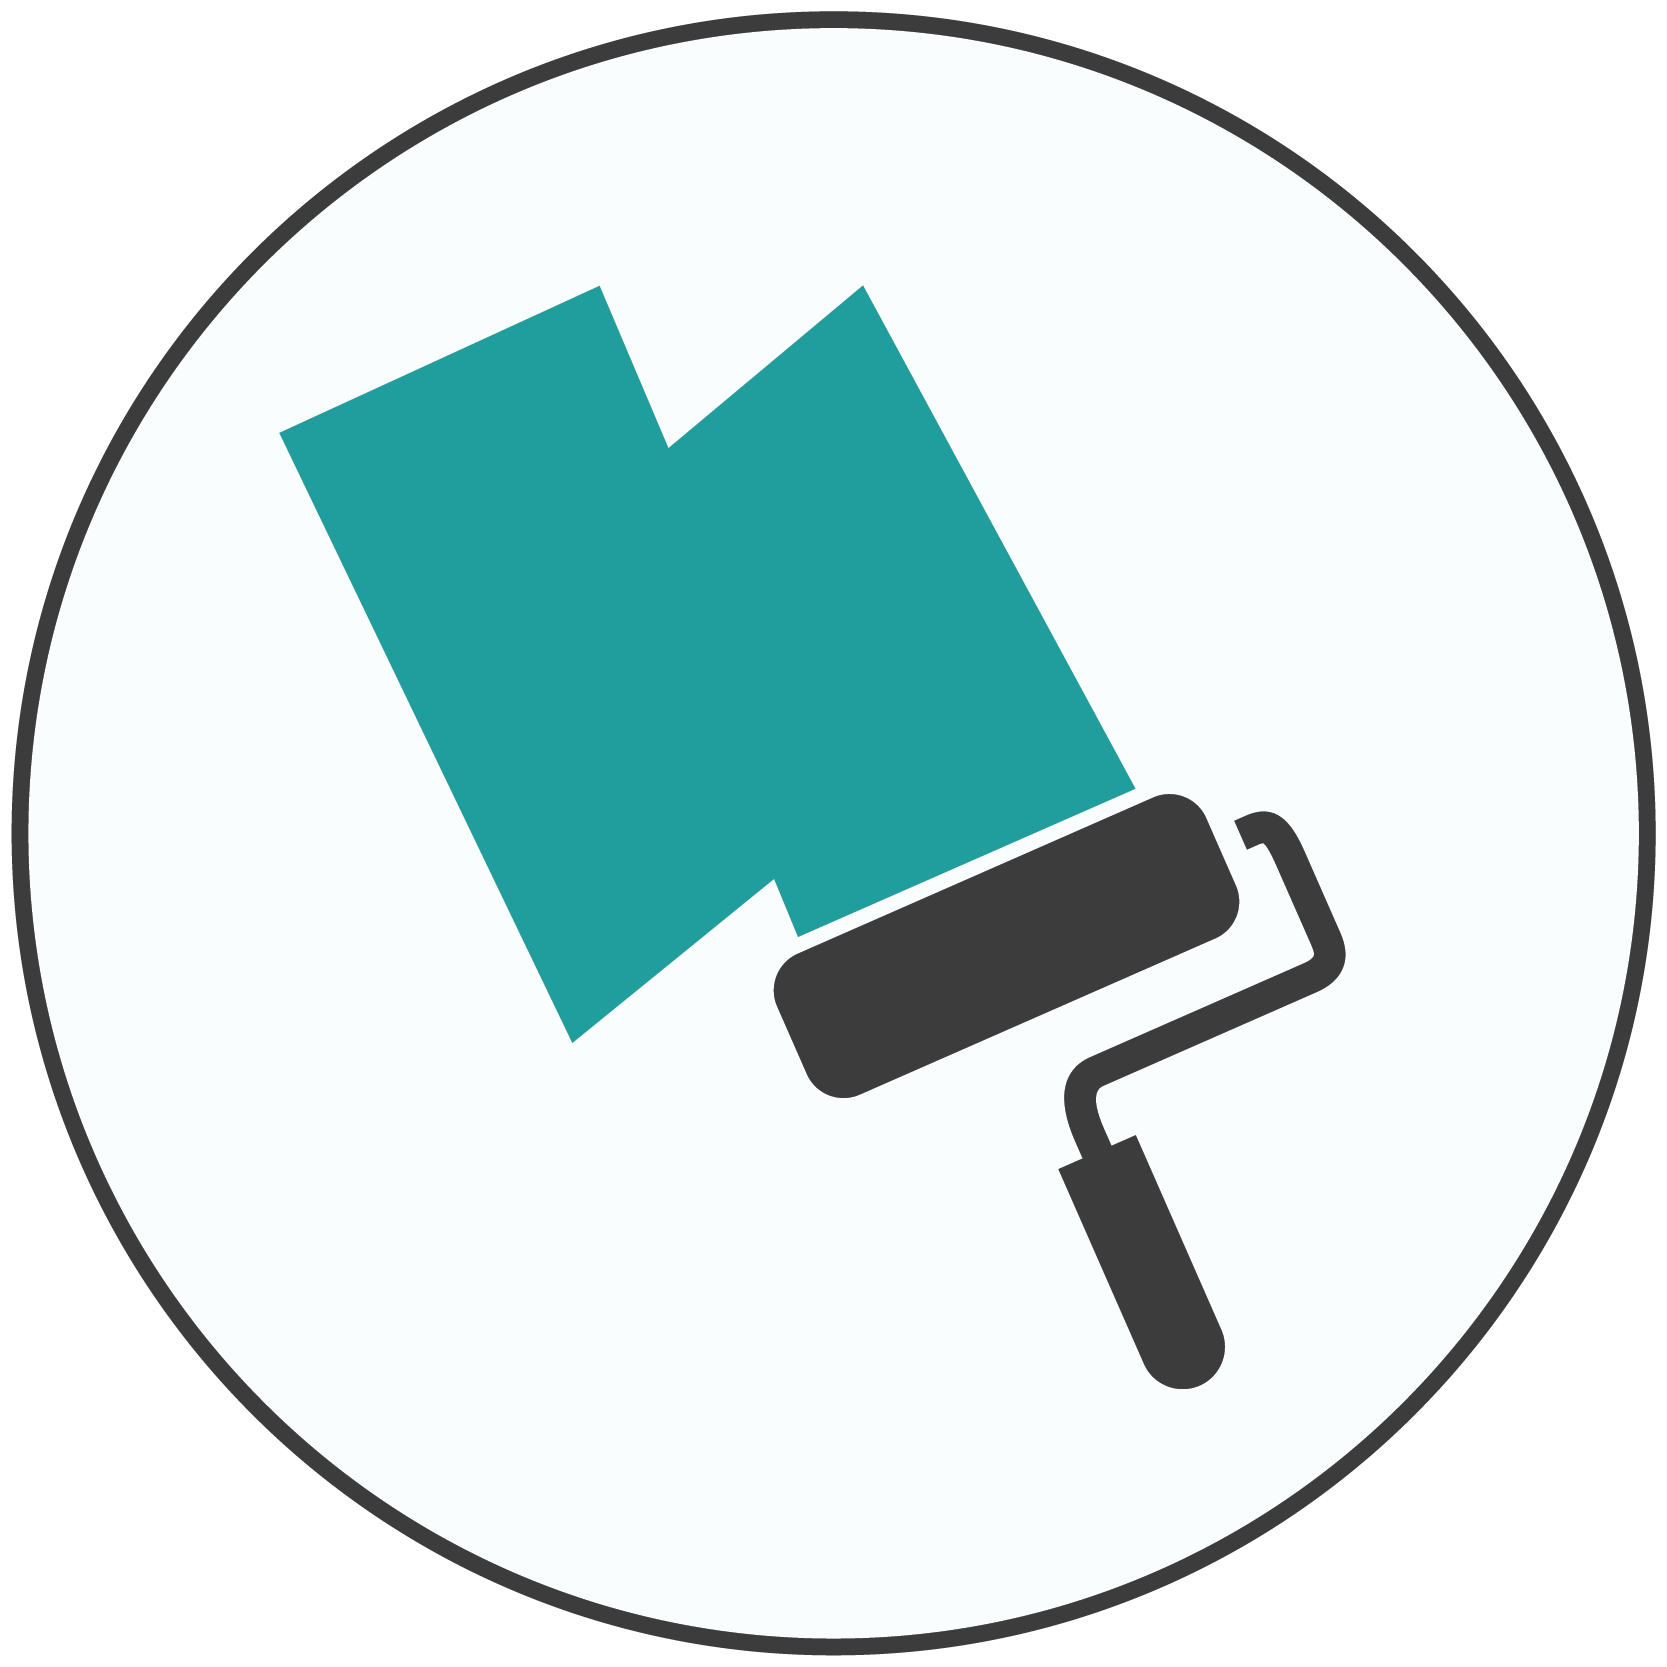 Teal and gray icon of a paint roller and primer